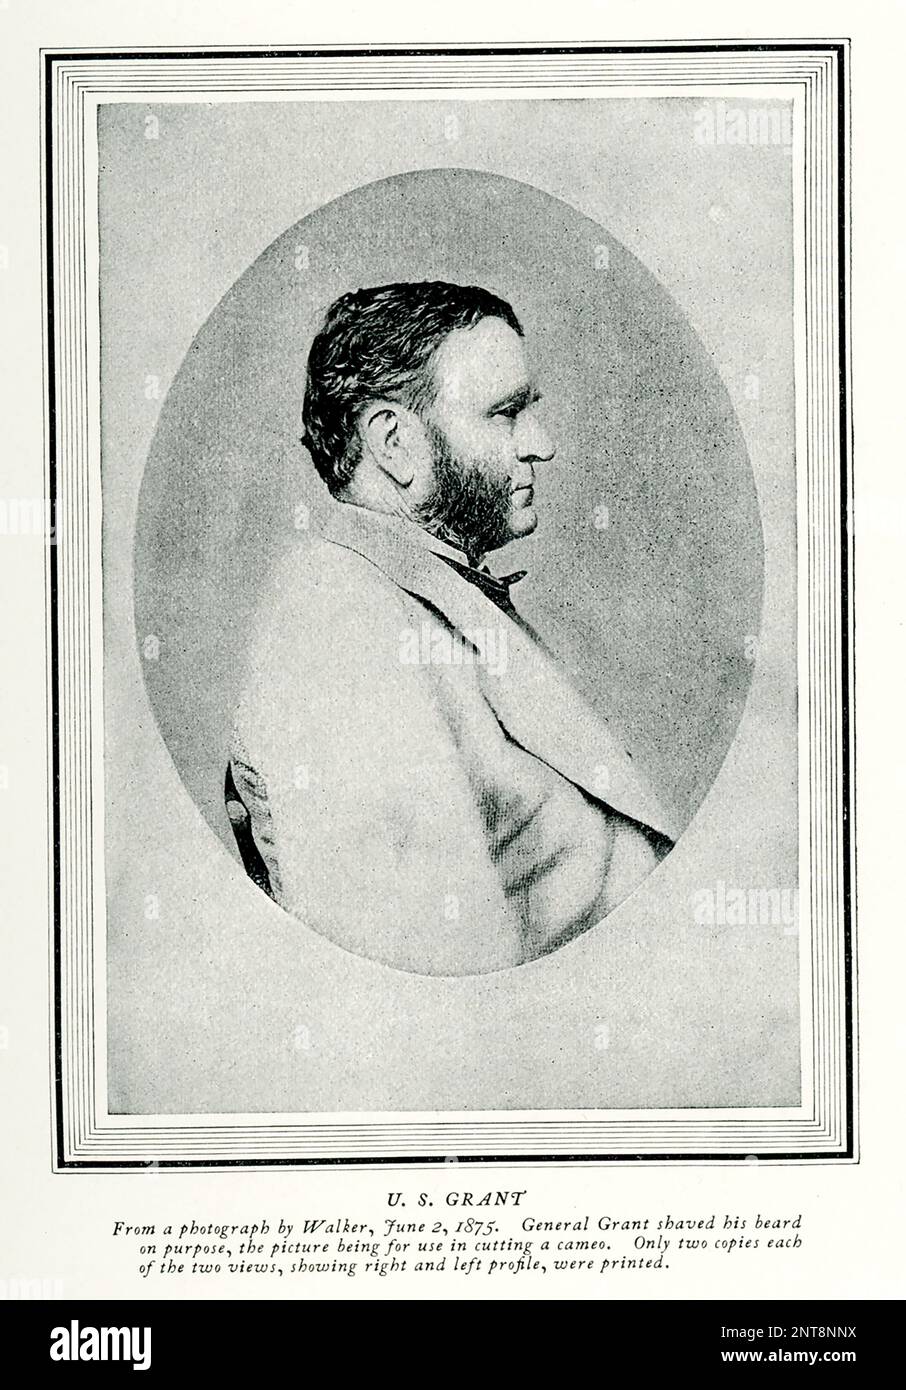 The 1896 caption reads: “U S Grant from photograph by Walker June 2 1875 General Grant shaved his beard on purpose the picture being used in cutting a cameo Only two copies each of two views, showing right and left profile, were printed.” Ulysses S. Grant (1822 - 1885) was an American military officer and politician who served as the 18th president of the United States from 1869 to 1877. Stock Photo